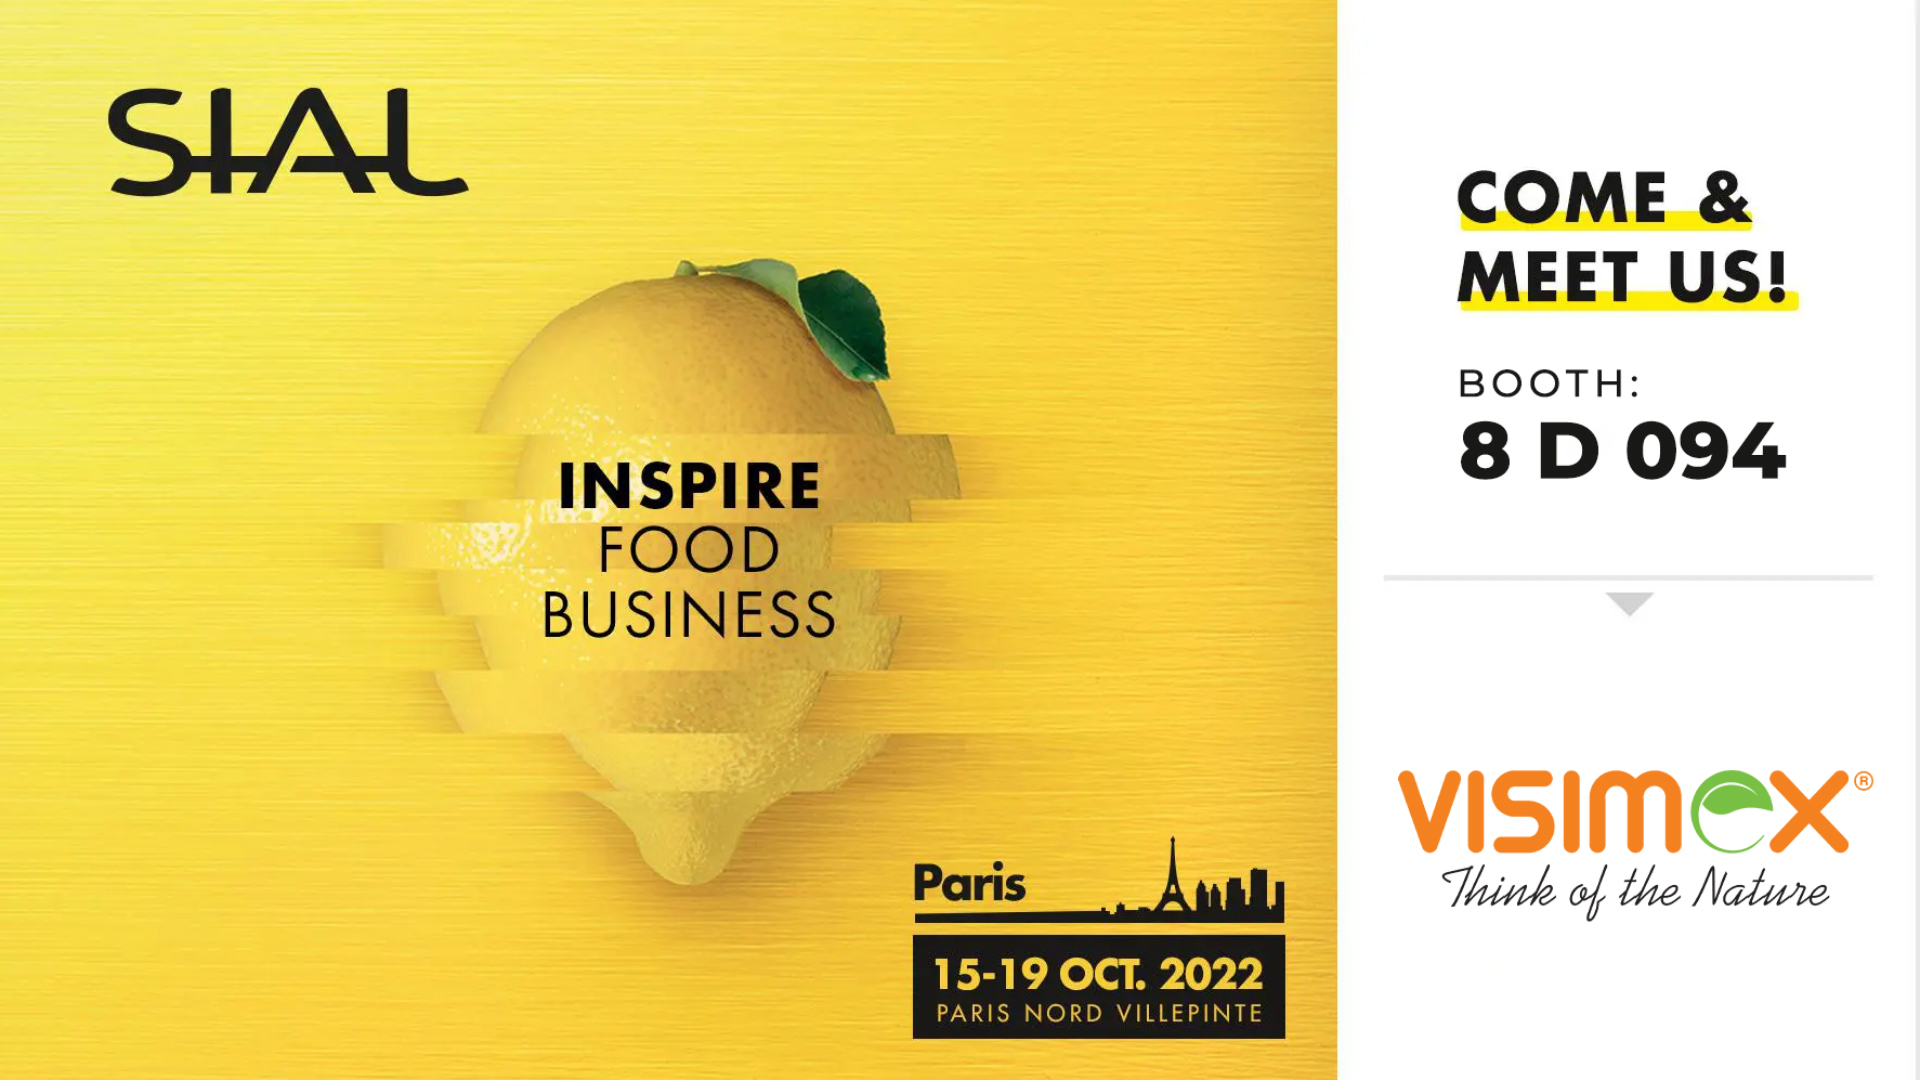 Visimex annouces to join Sial Paris 2022 - The world’s largest food innovation exhibition.